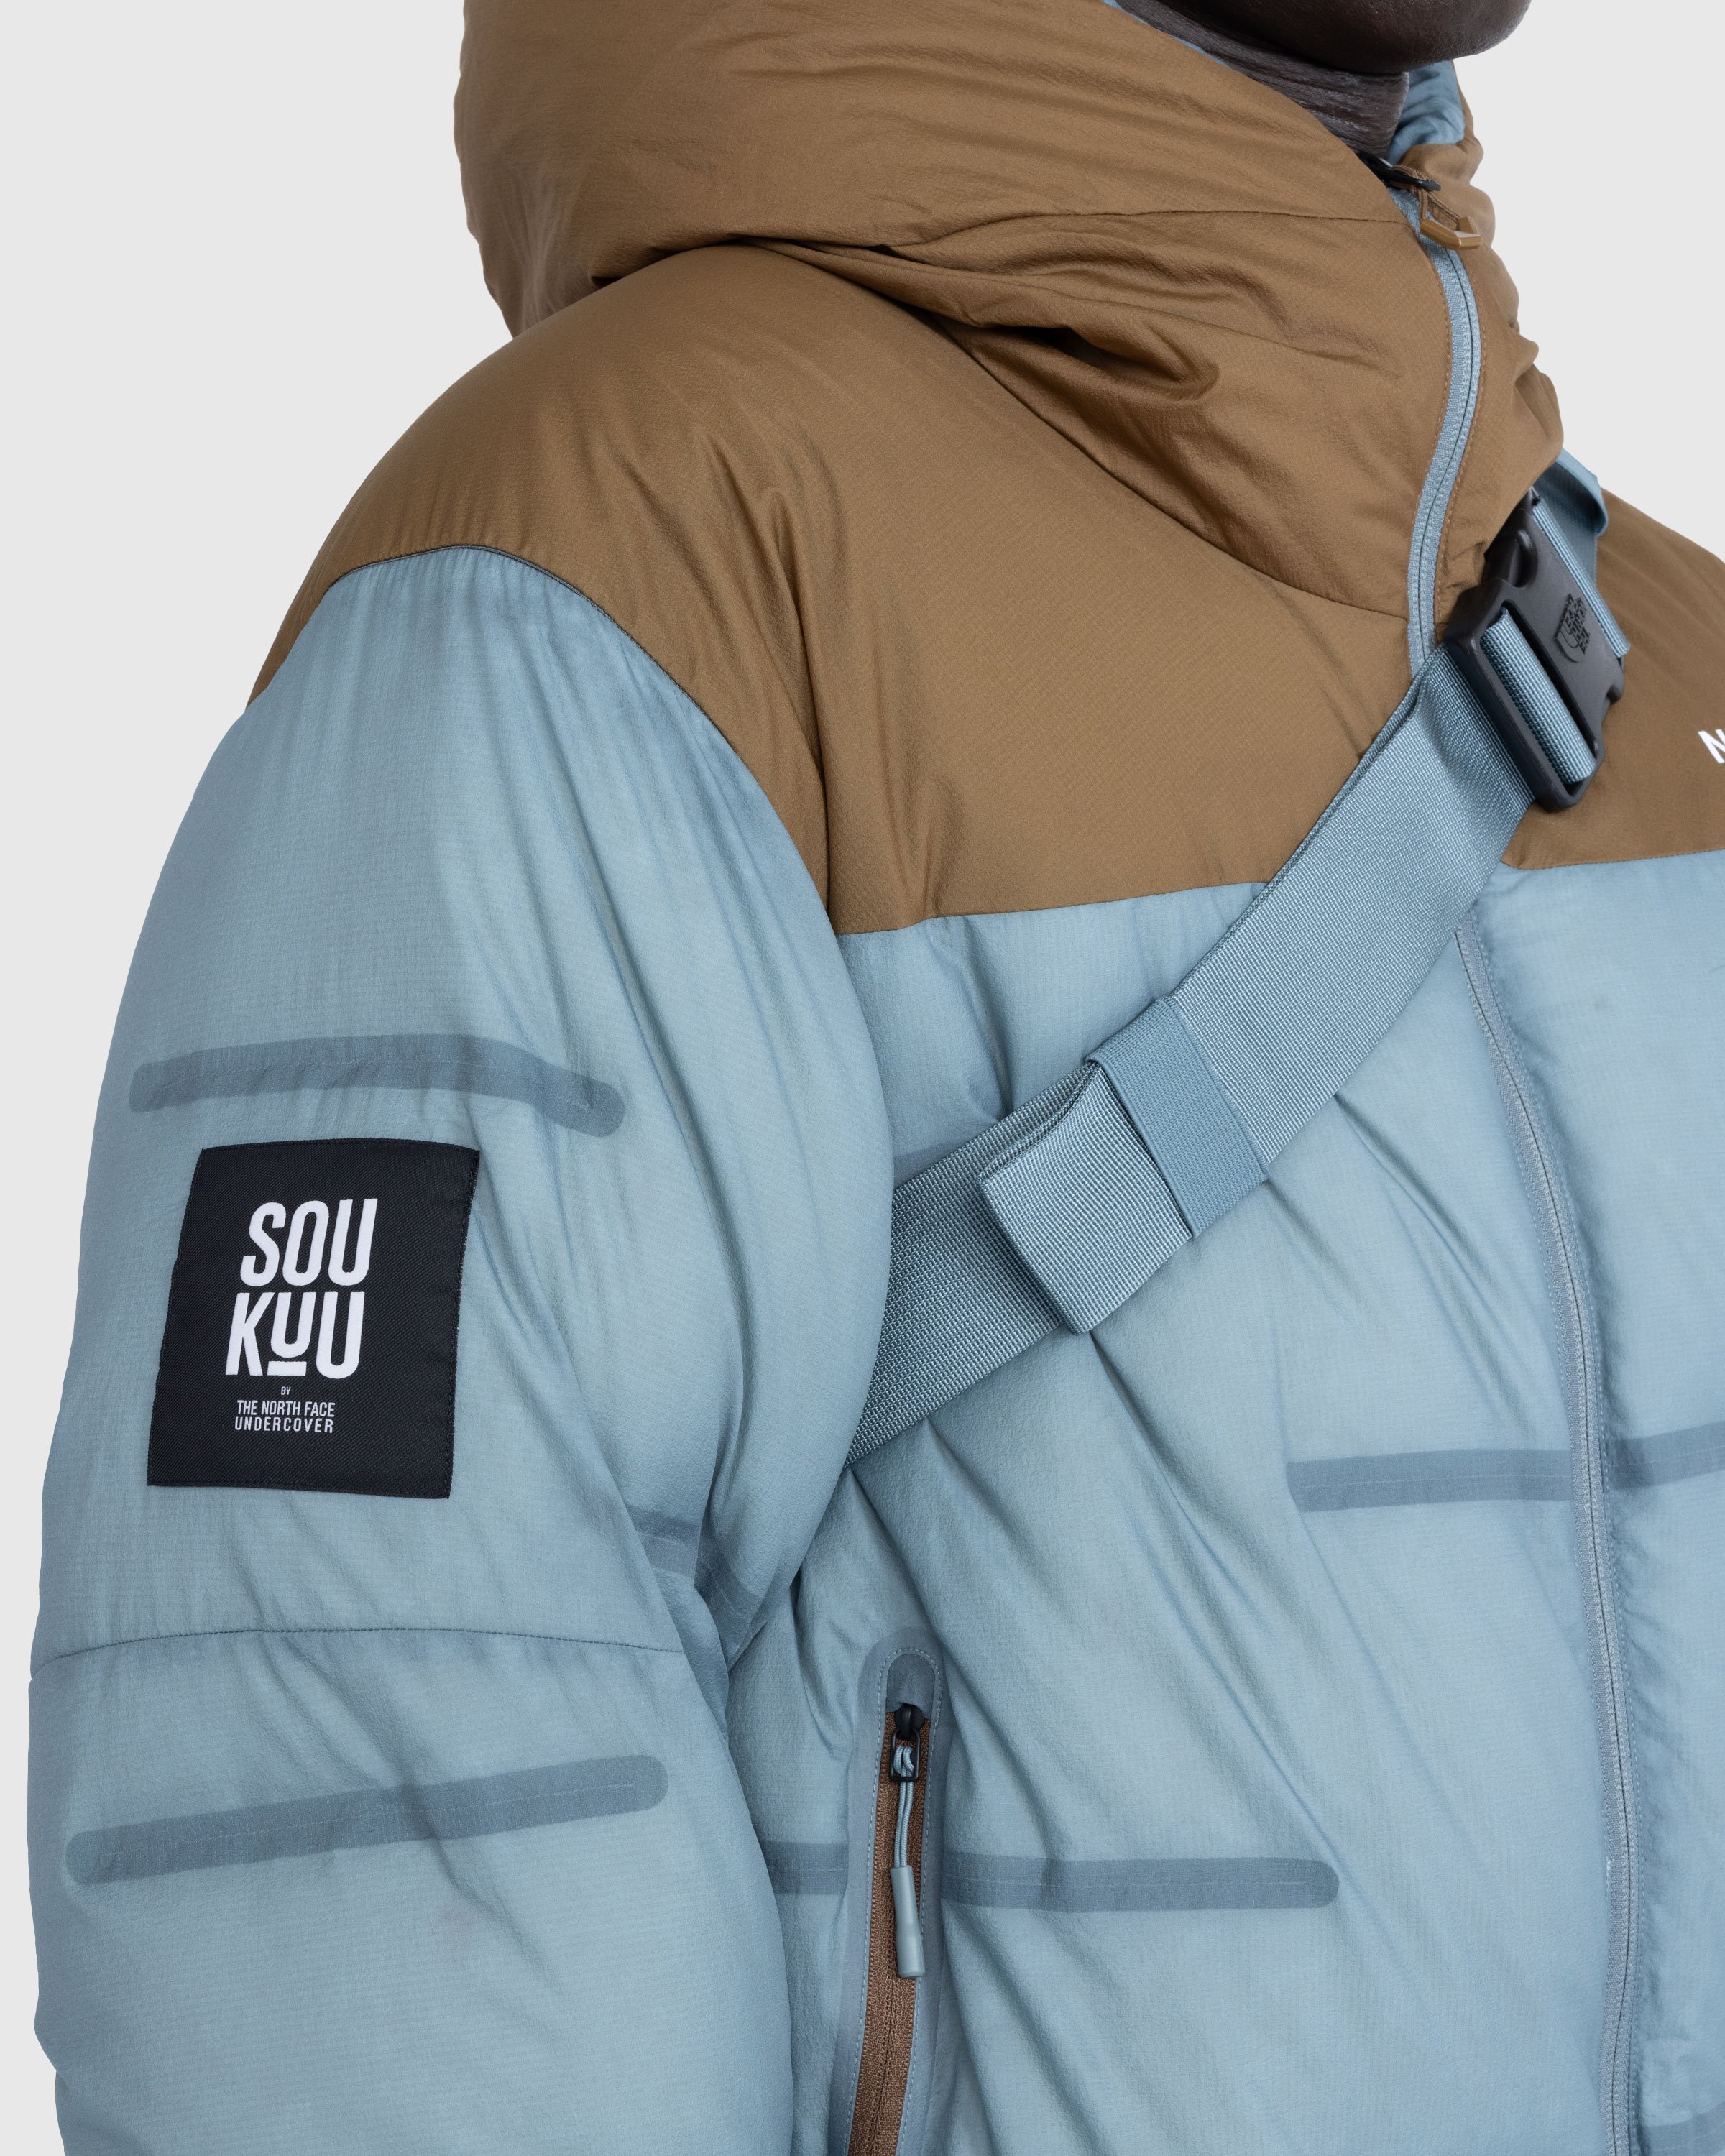 The North Face x UNDERCOVER - Soukuu Cloud Down Nupste Sepia Brown/Concrete Gray - Clothing - Multi - Image 8